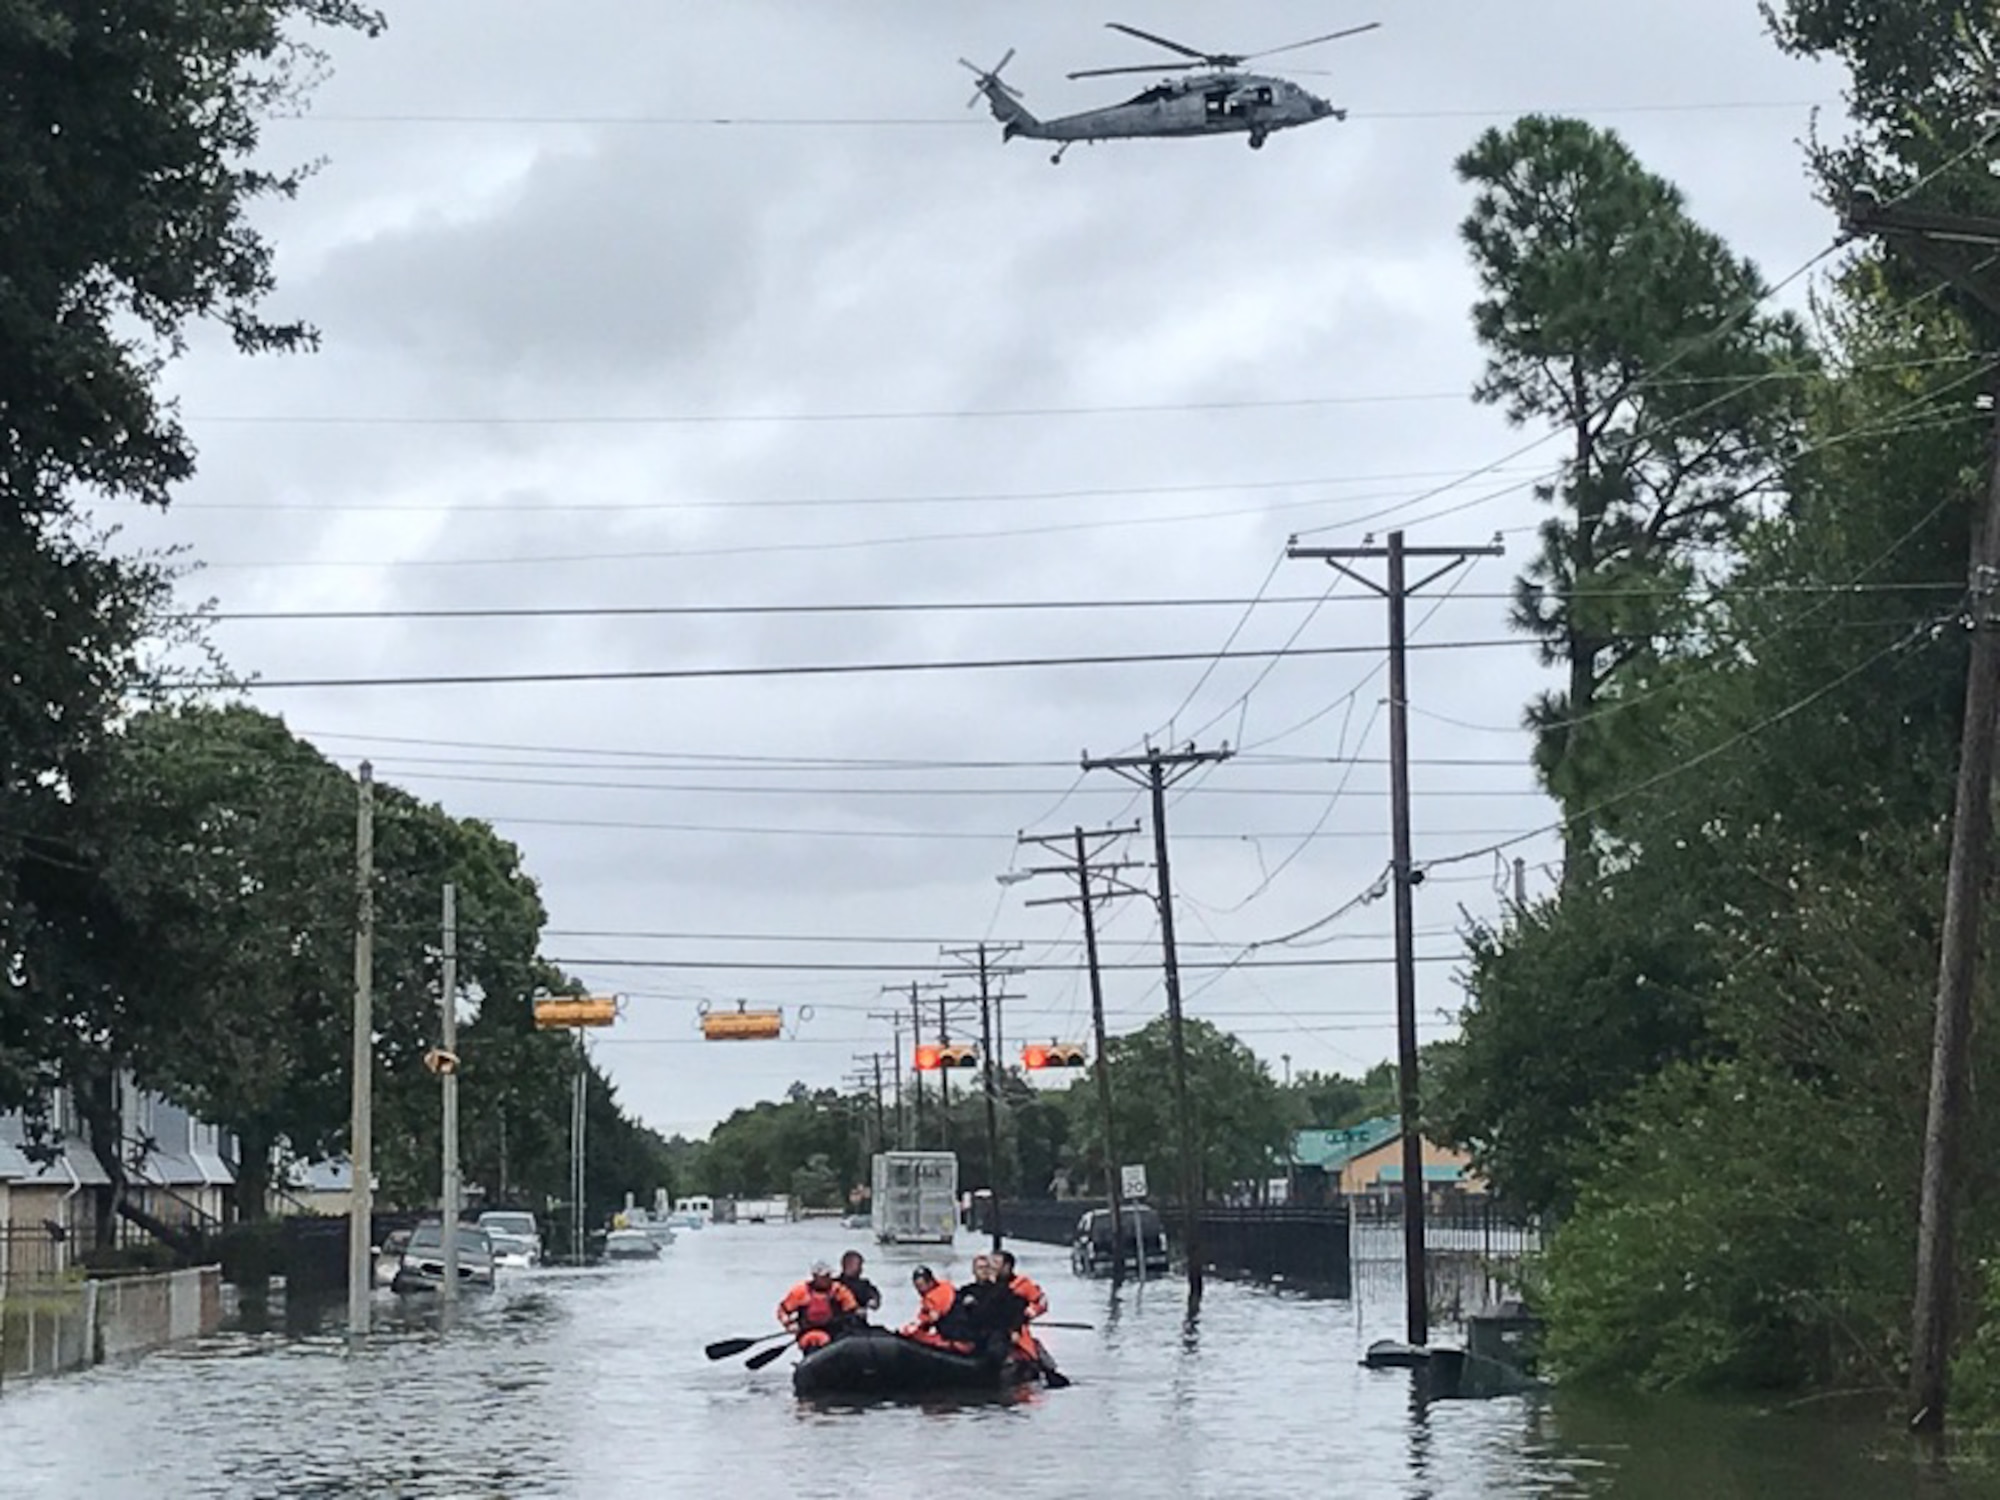 123rd STS conducts personnel rescue in Port Arthur, Texas.